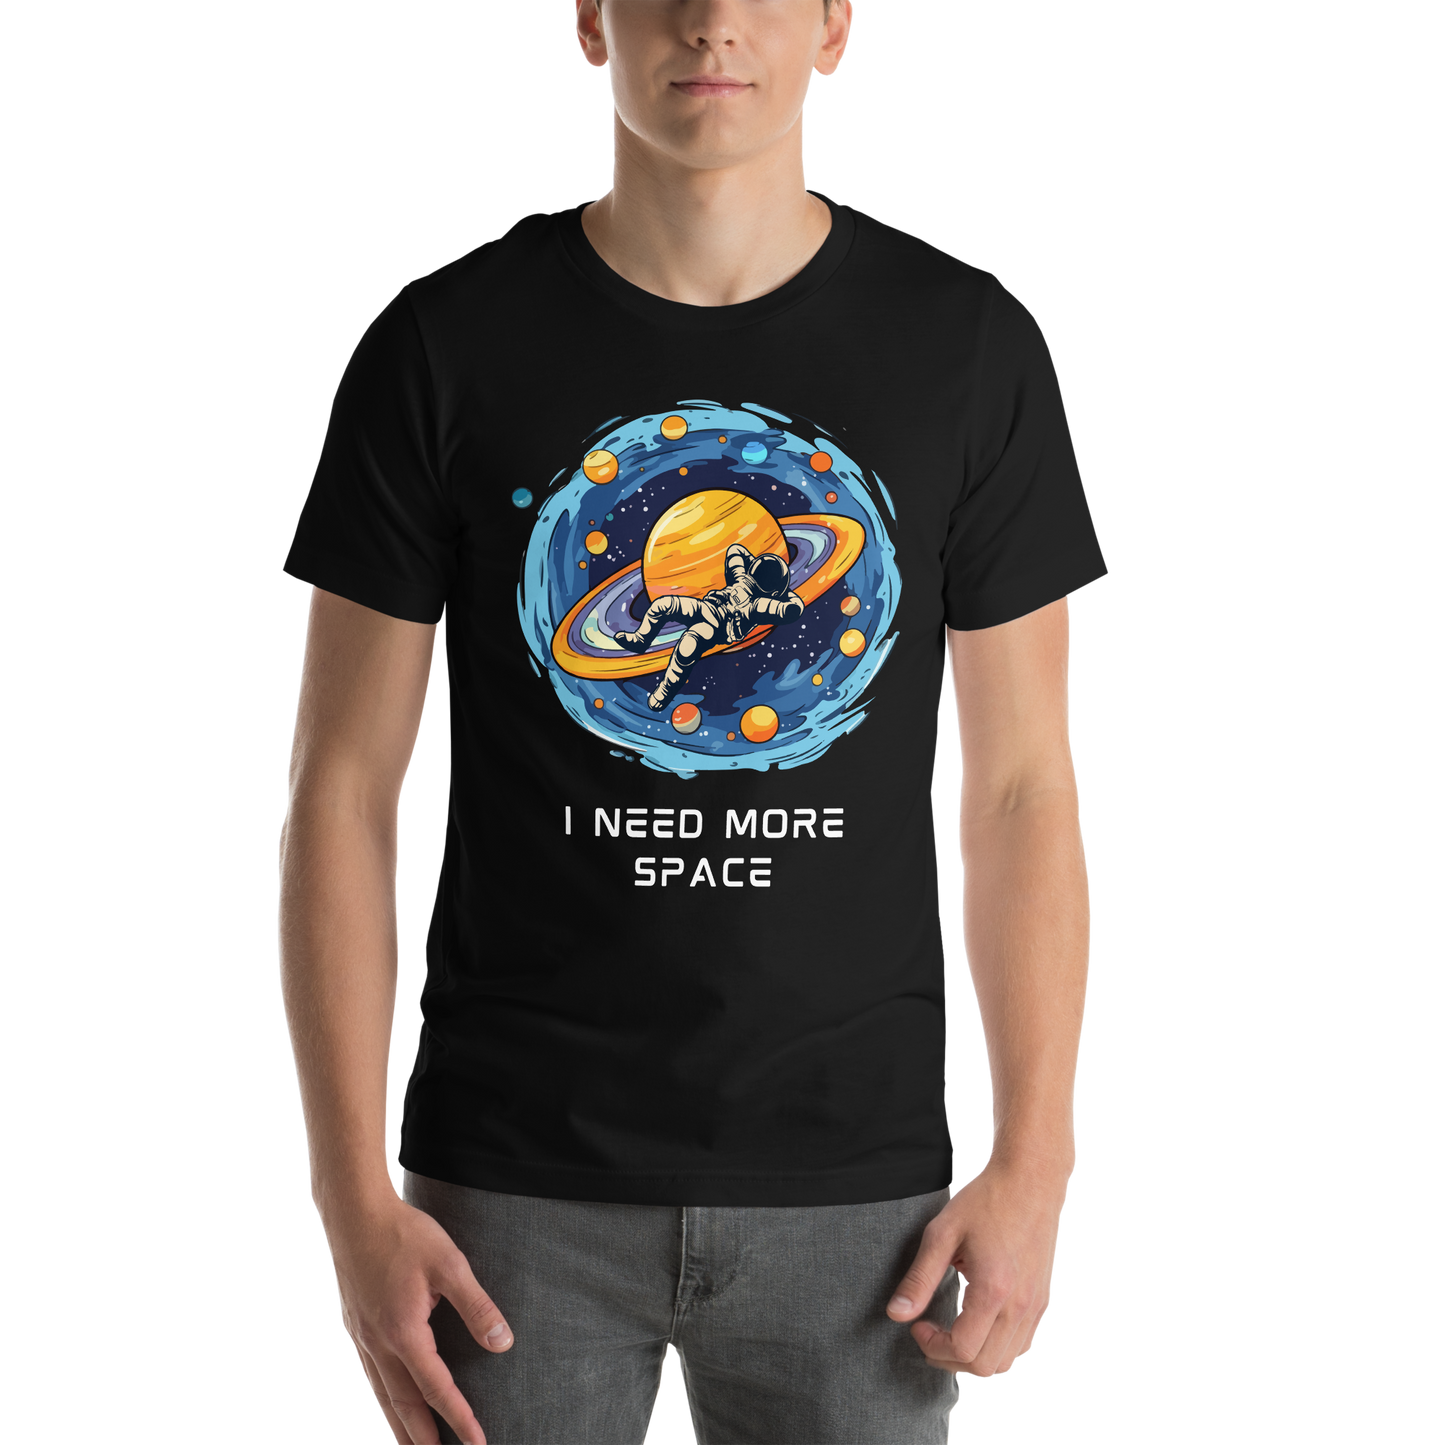 Man wearing a Black Premium Astronaut Tee featuring a captivating I Need More Space graphic on the chest - Funny Graphic Space Tees - Boozy Fox